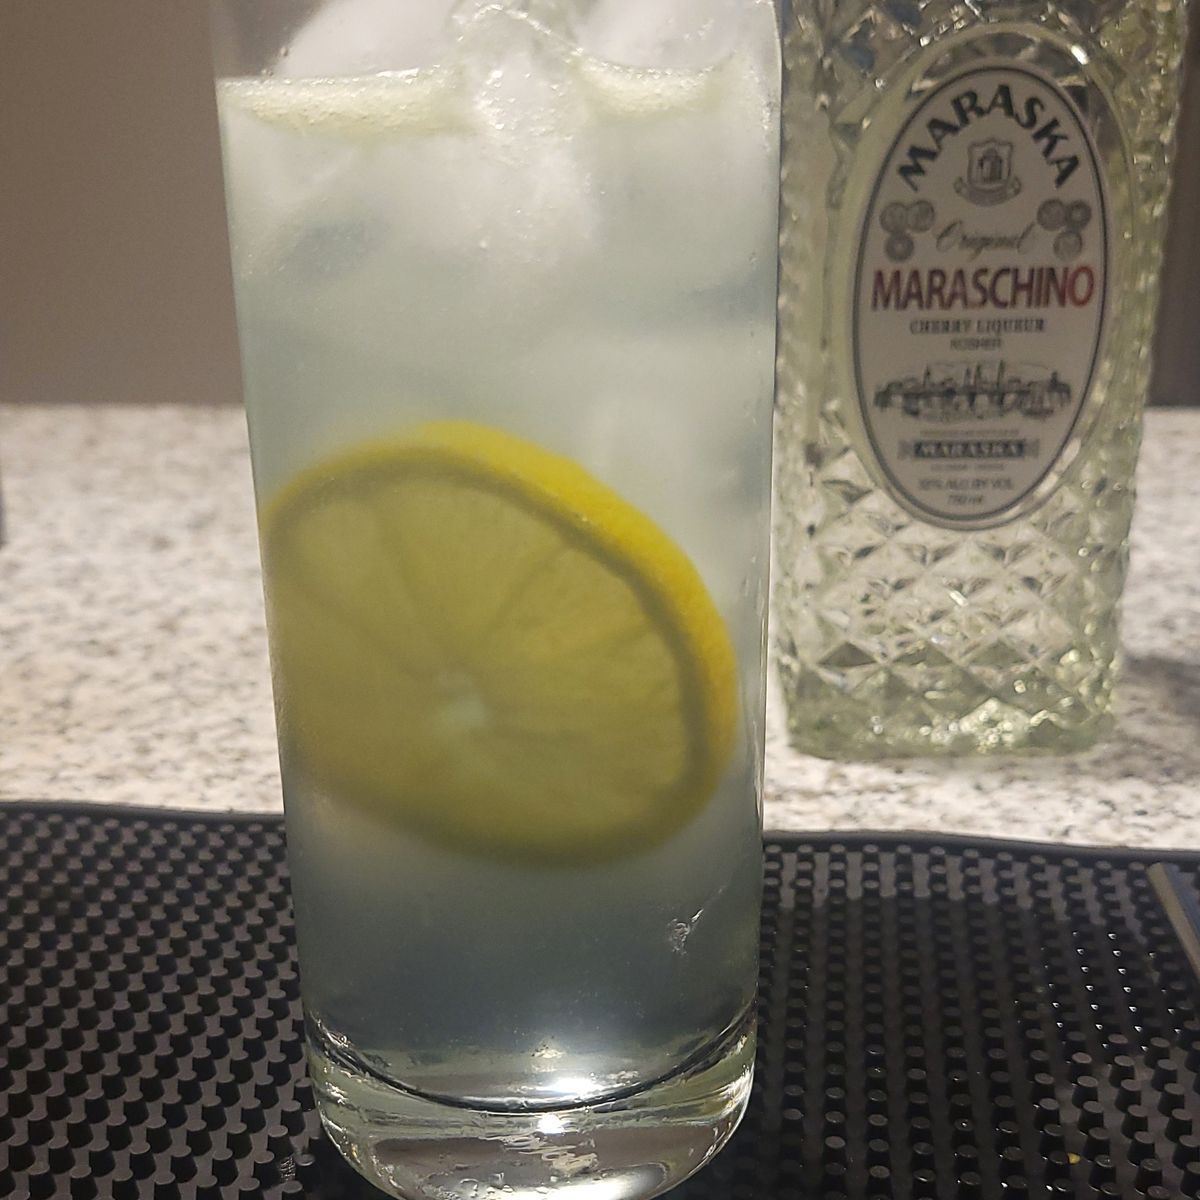 This is a riff on the gin and tonic I found online. I made it to celebrate gin and tonic day, and I was not disappointed at all.